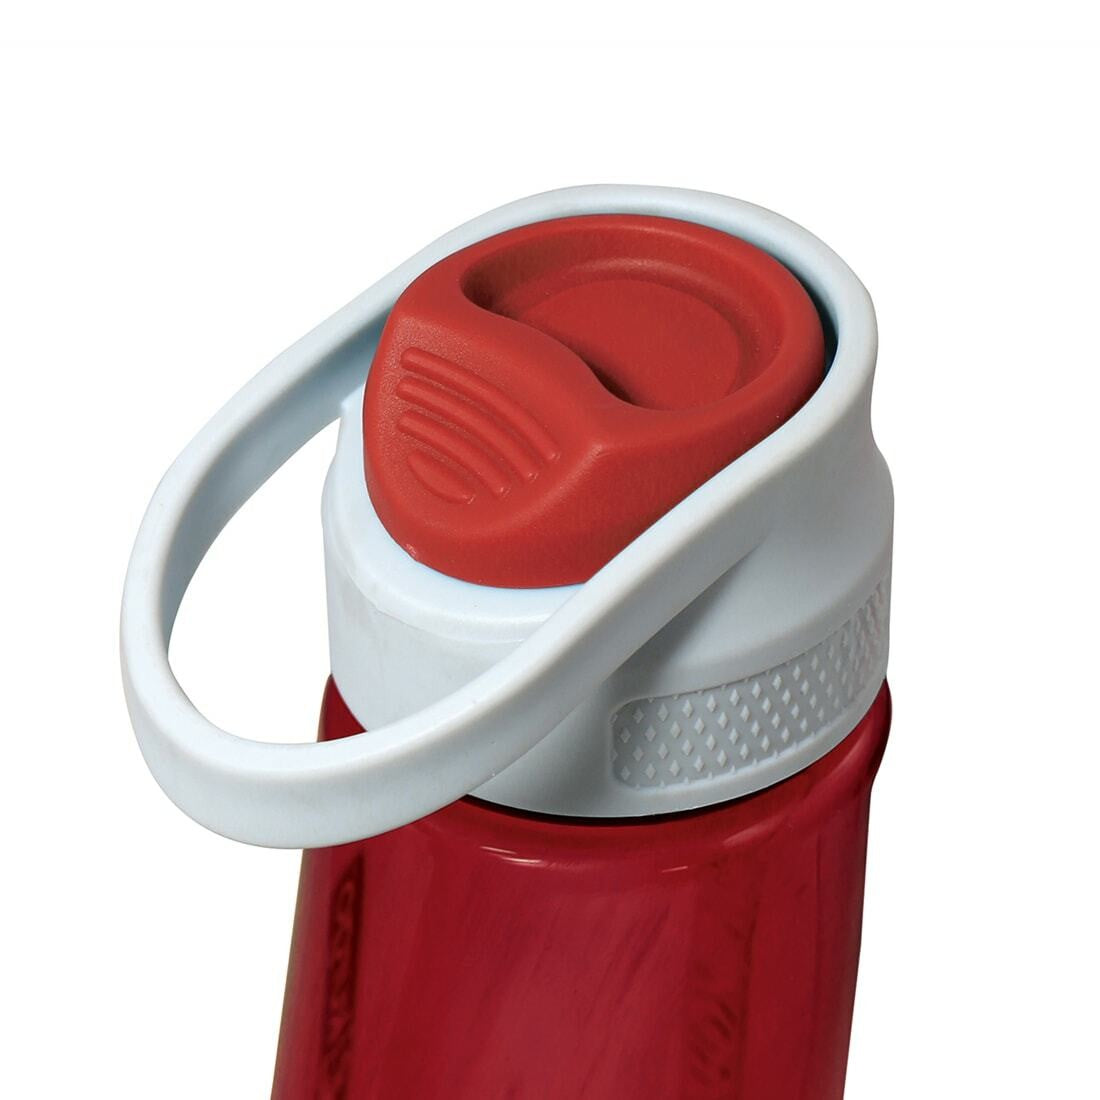 Close-up of a red water bottle's cap with white handle.